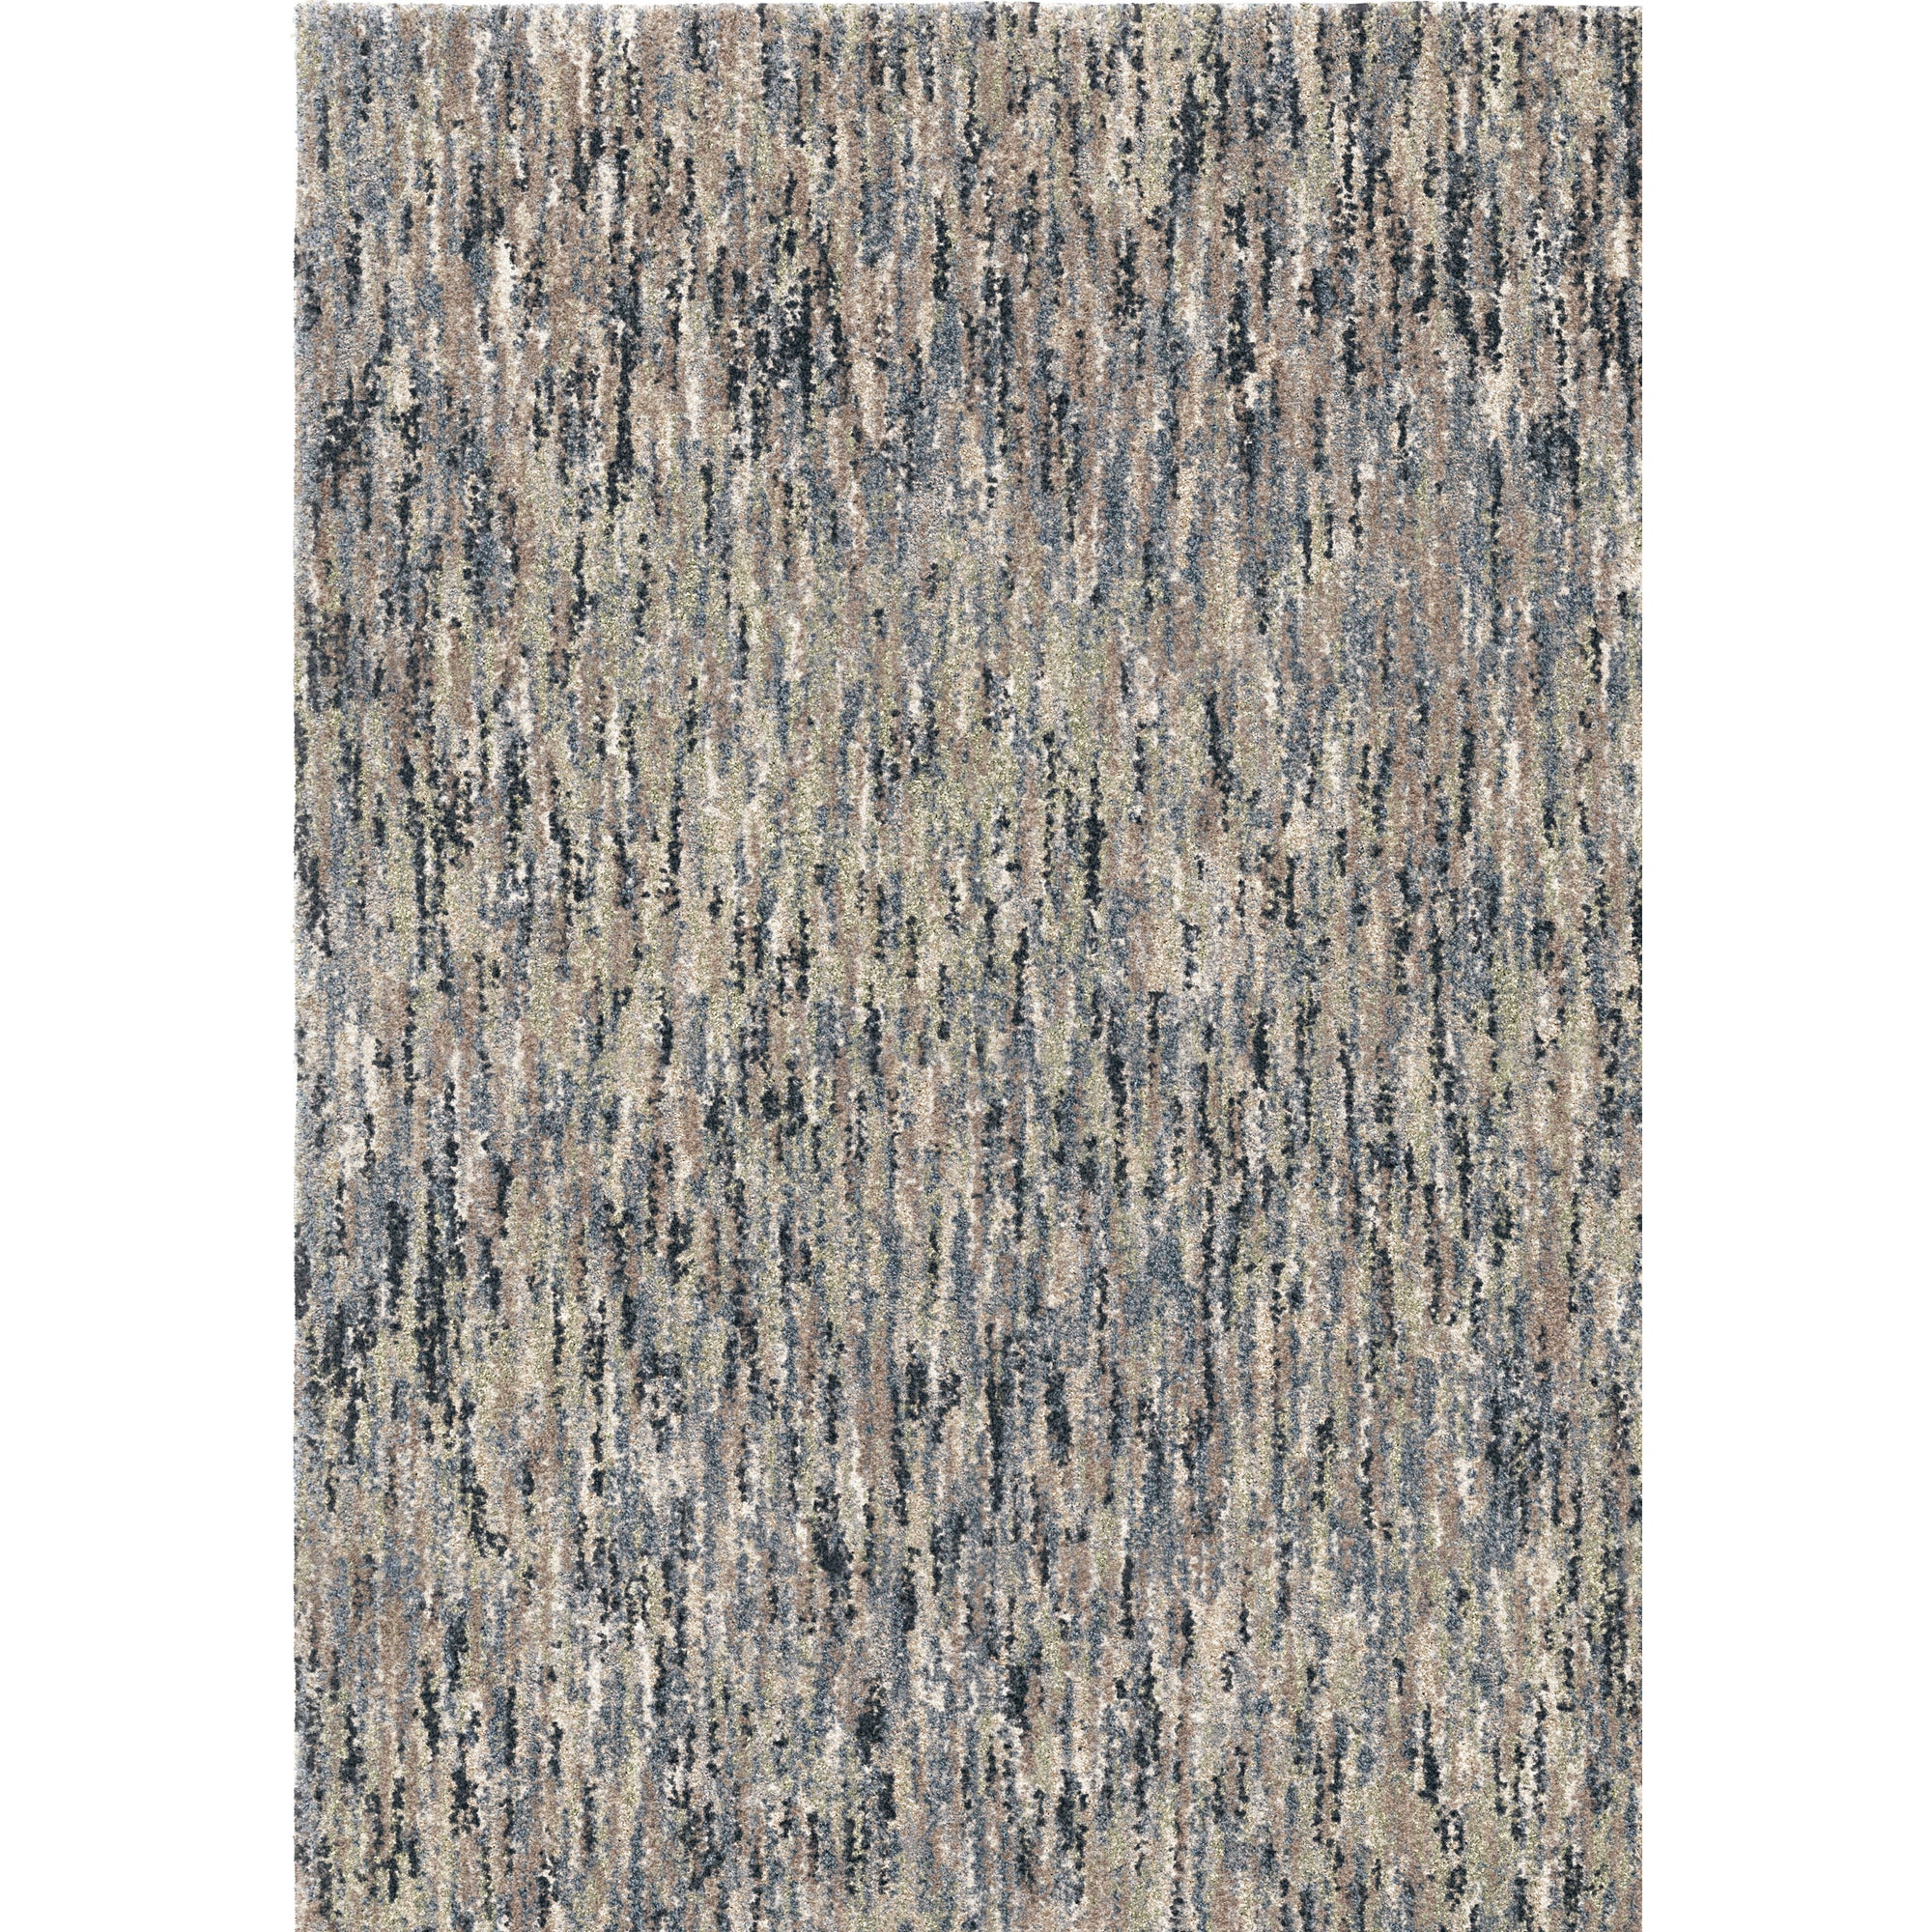 Palmetto Living Next Generation Multi solid Muted Blue Area Rug - 7'10" x 10'10"